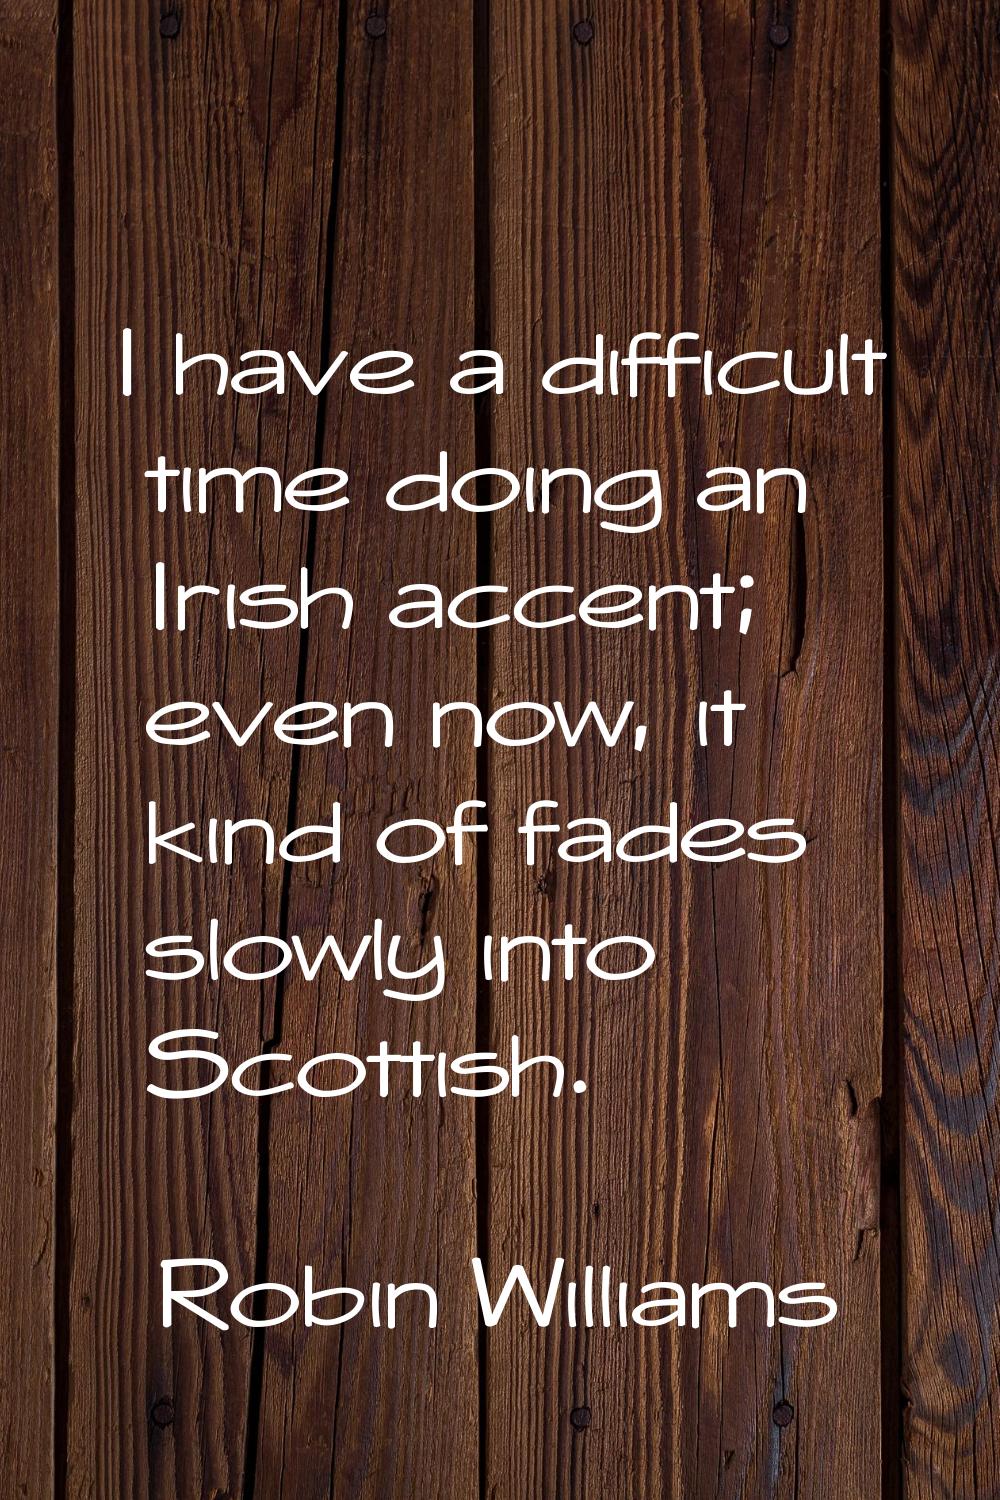 I have a difficult time doing an Irish accent; even now, it kind of fades slowly into Scottish.